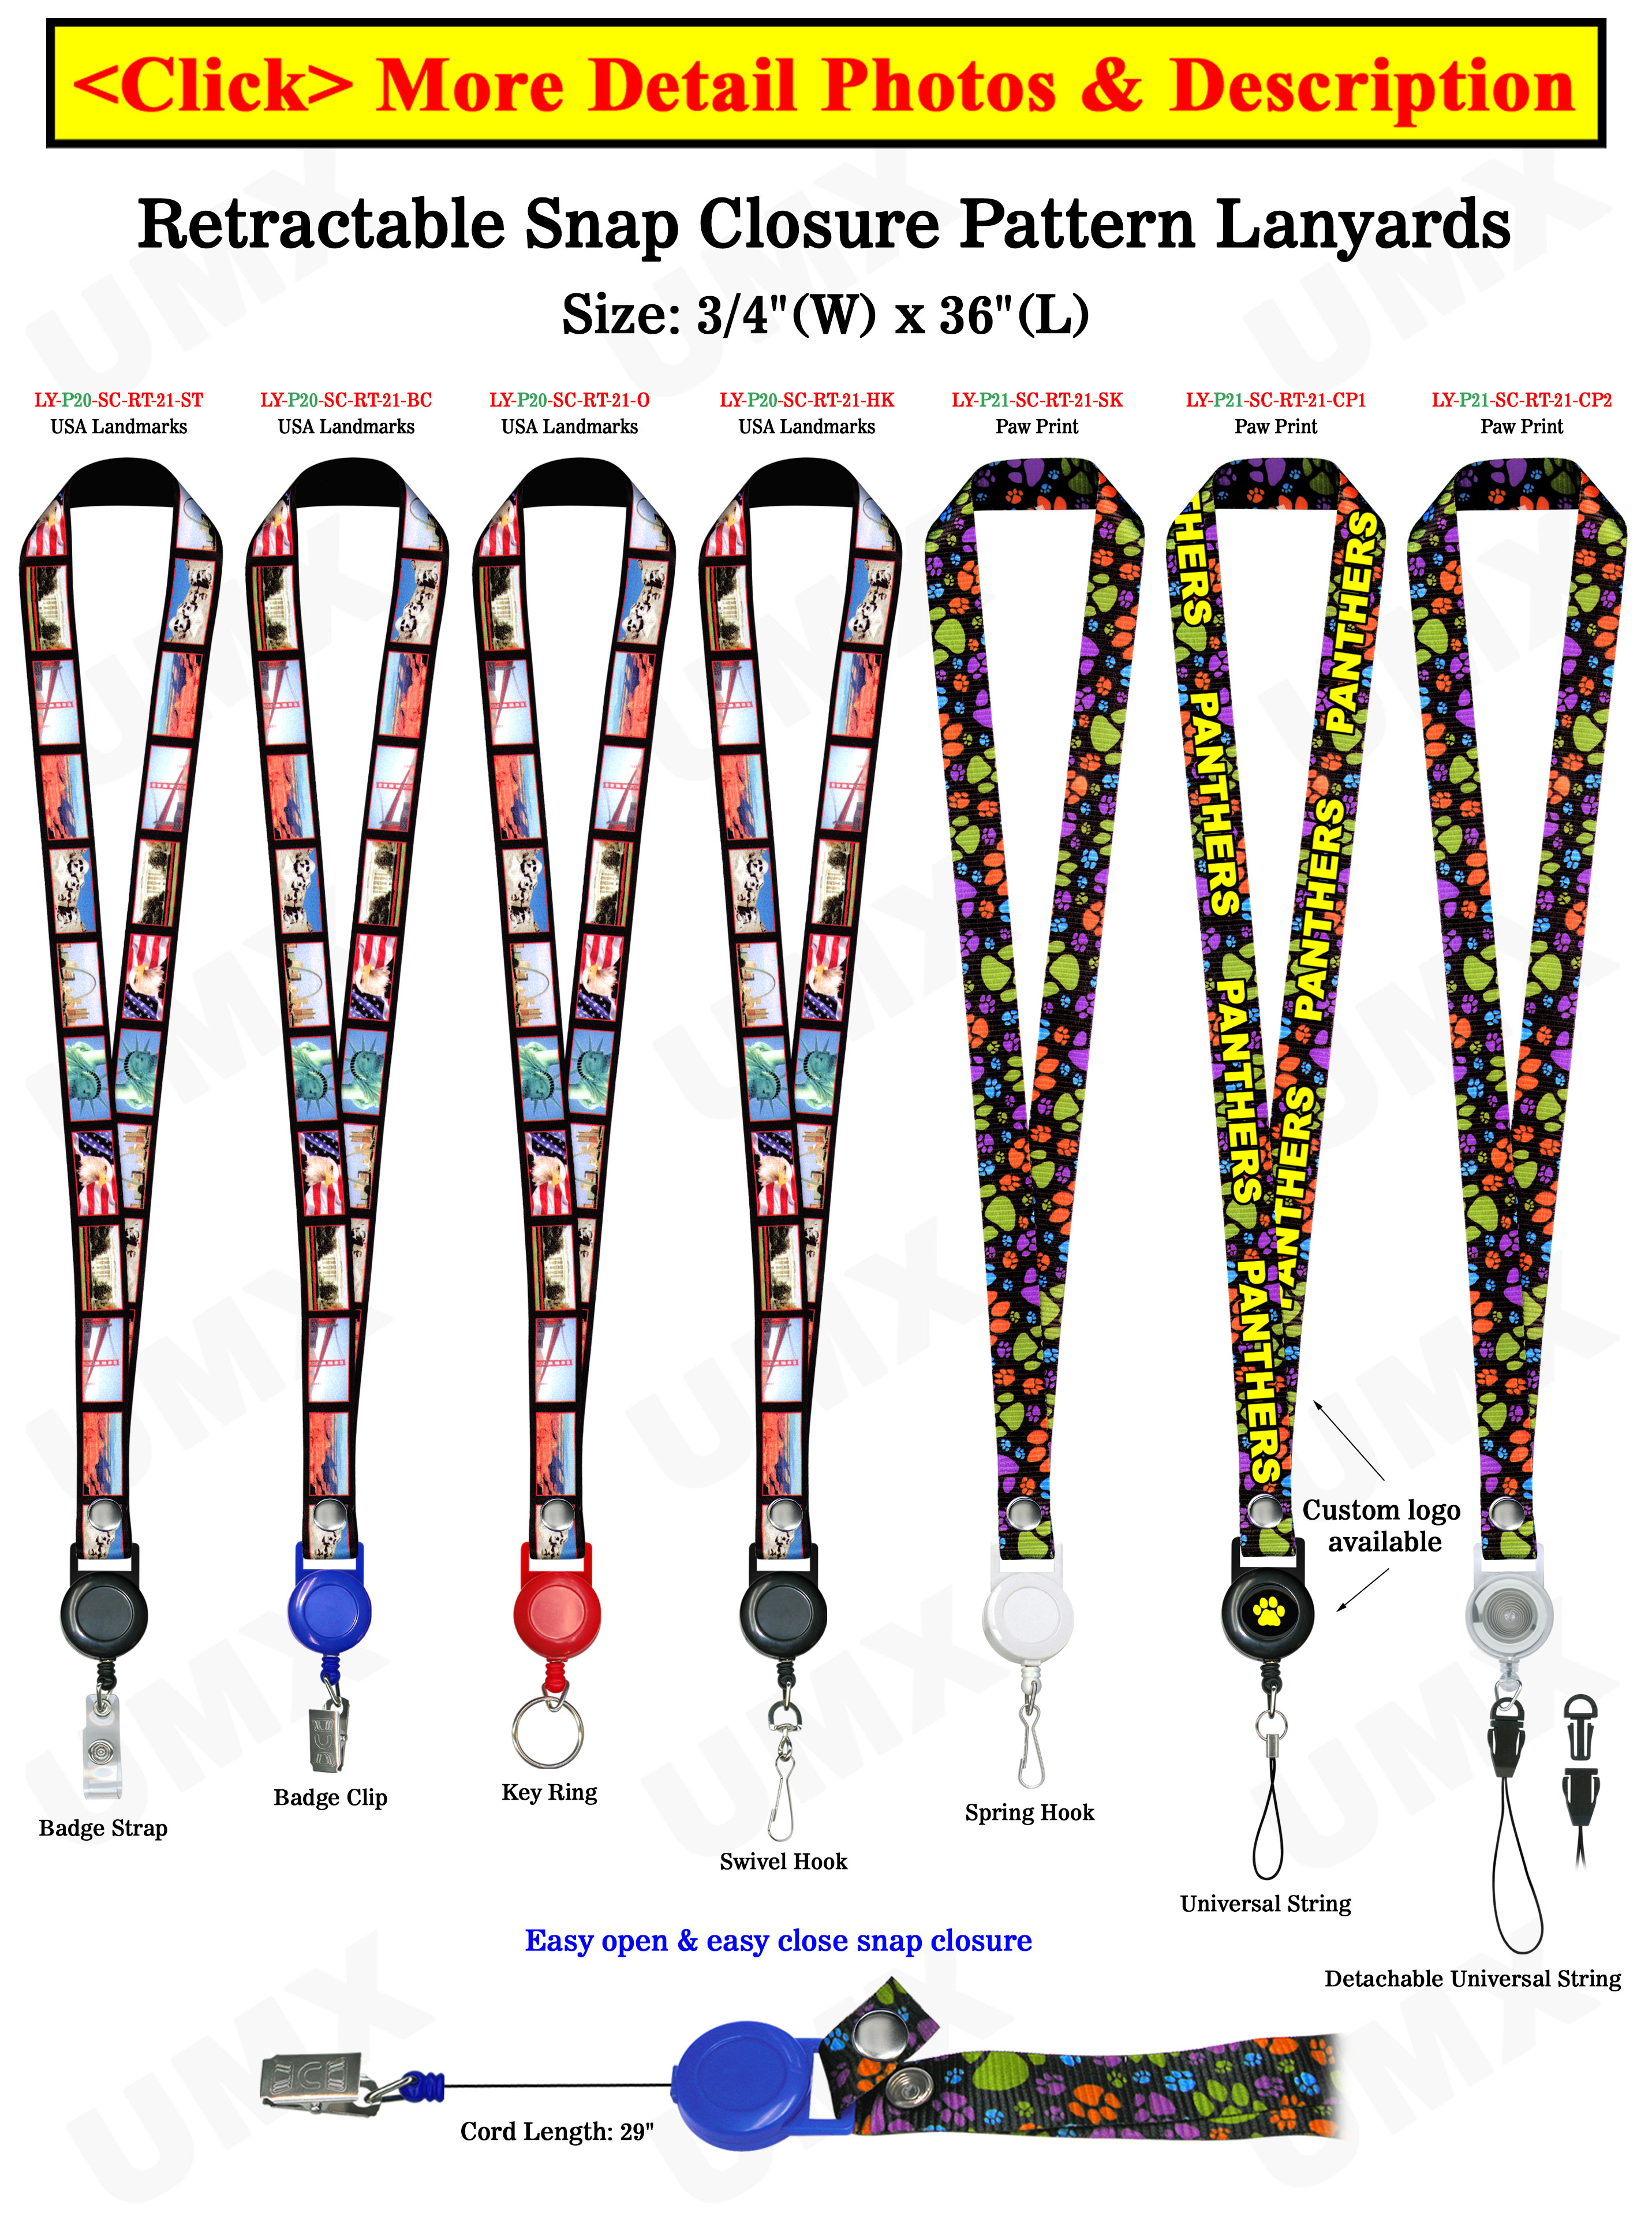 Retractable Identification Holder Lanyards: With 3/4" Art Printed Neck Straps